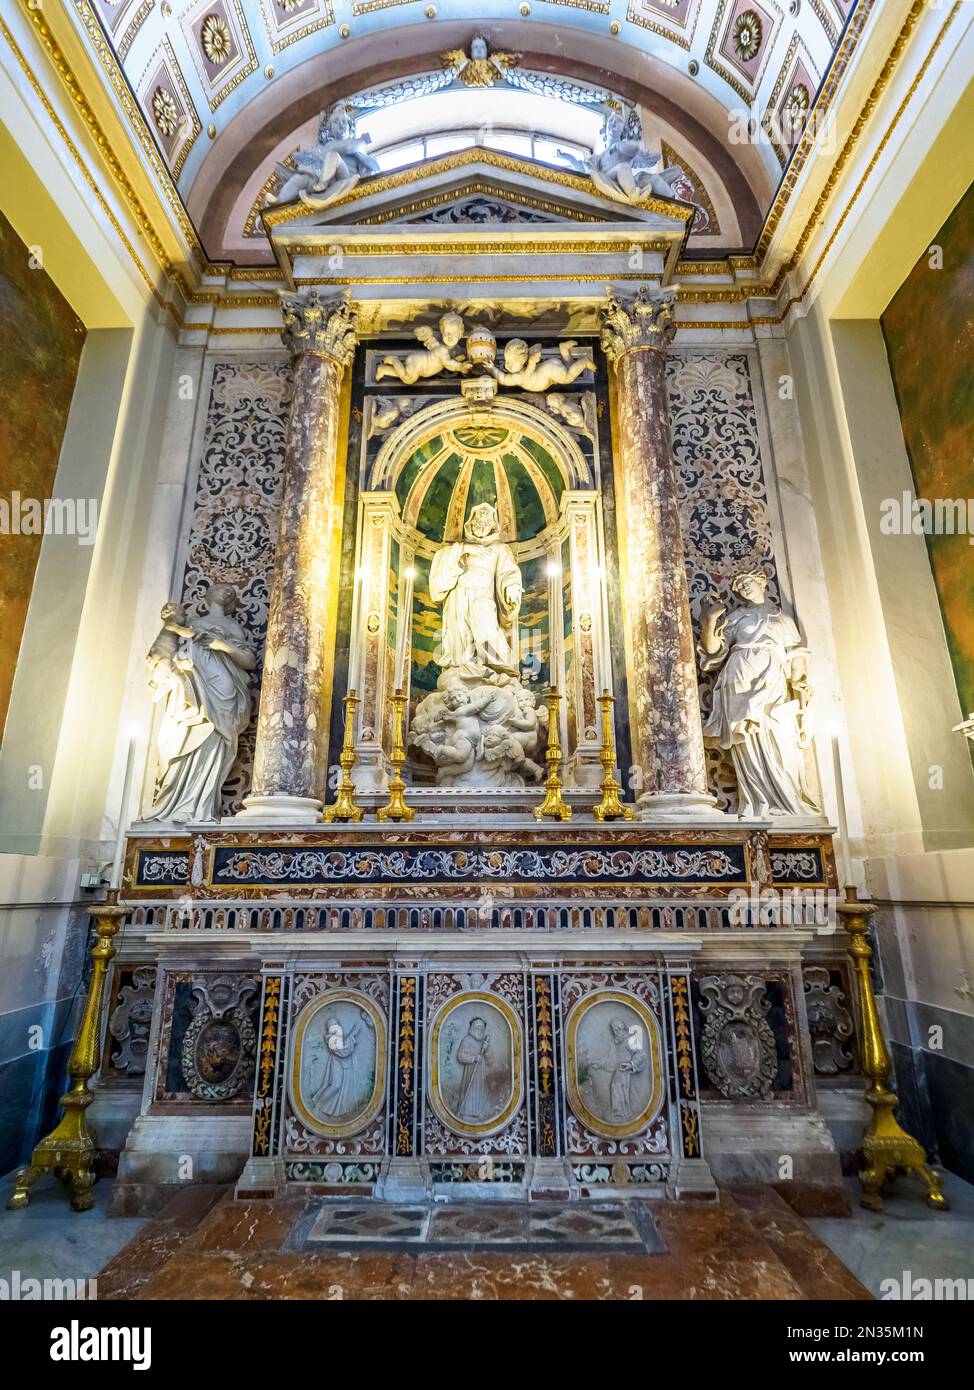 St. Francis of Paola's chapel - Palermo Cathedral, Palermo, Sicily, Italy. Stock Photo